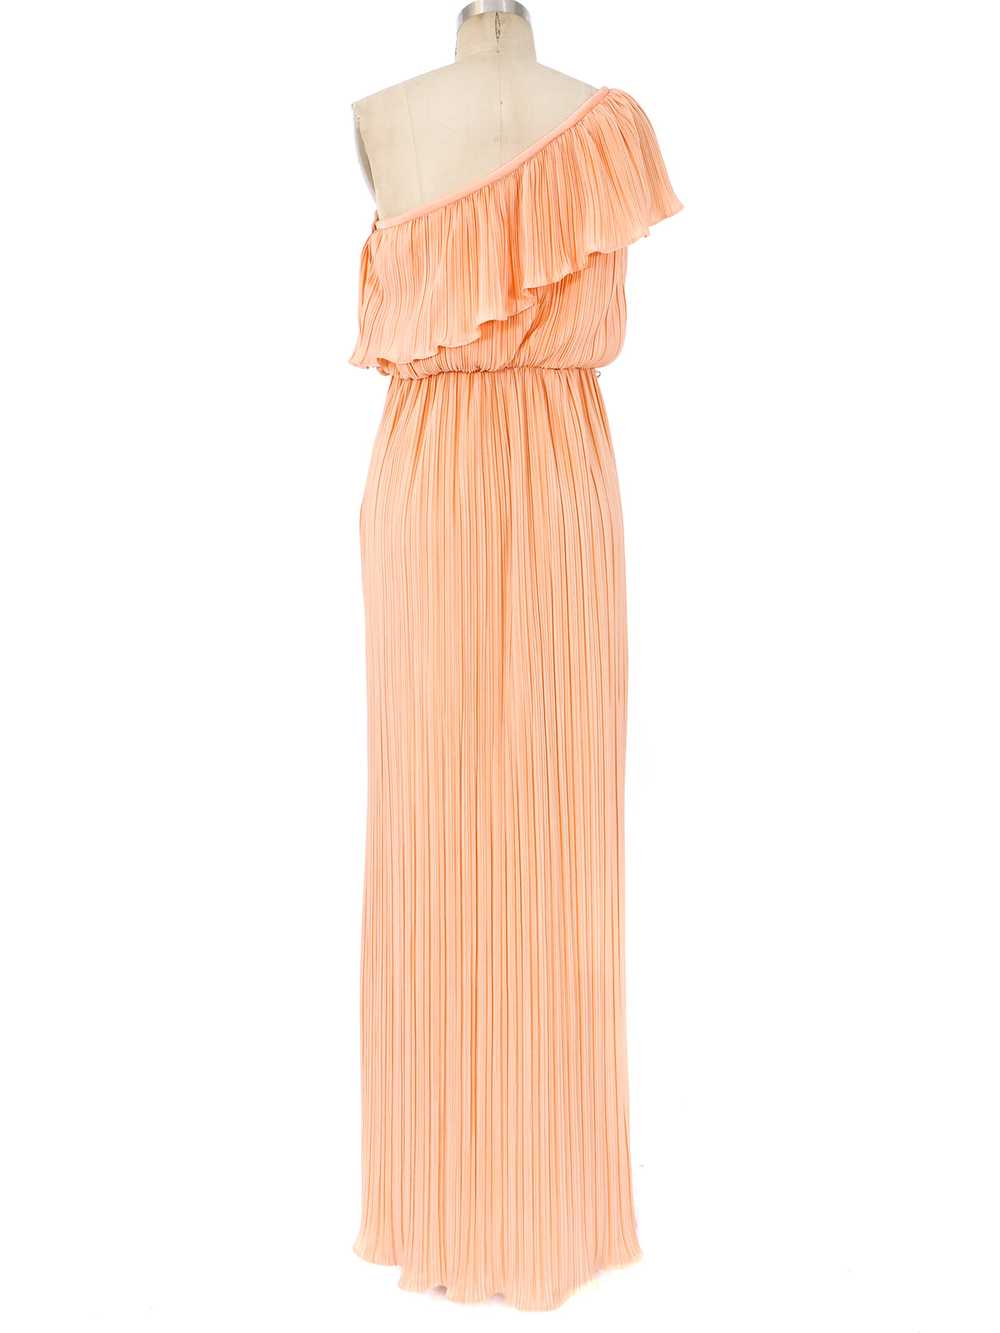 Peach Pleated One Shoulder Dress - image 4